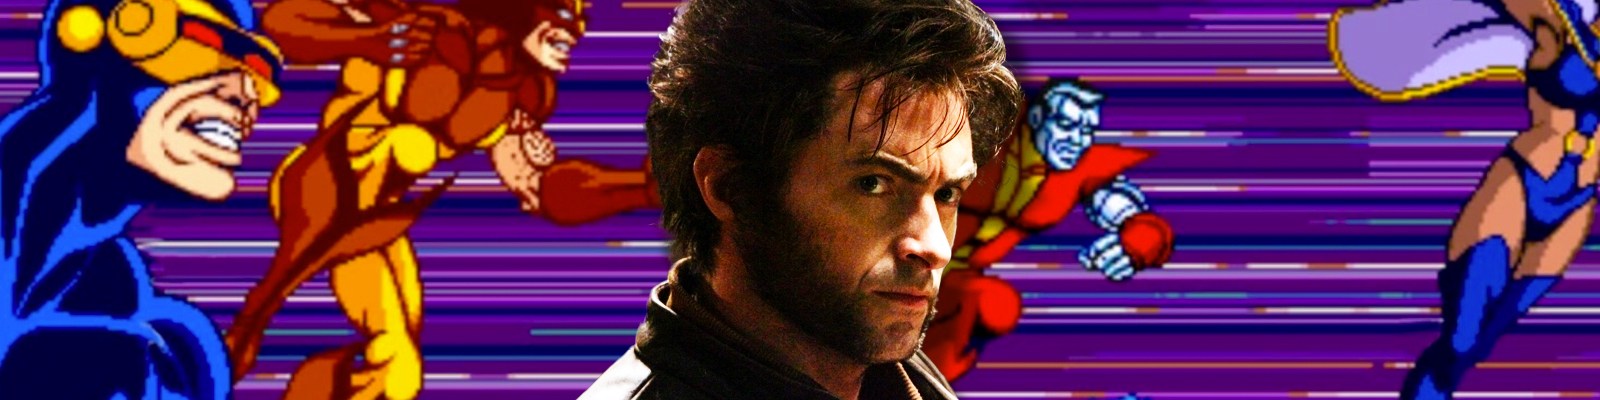 How A 90s ‘X-Men’ Arcade Game Helped Relaunch Comic Book Movies